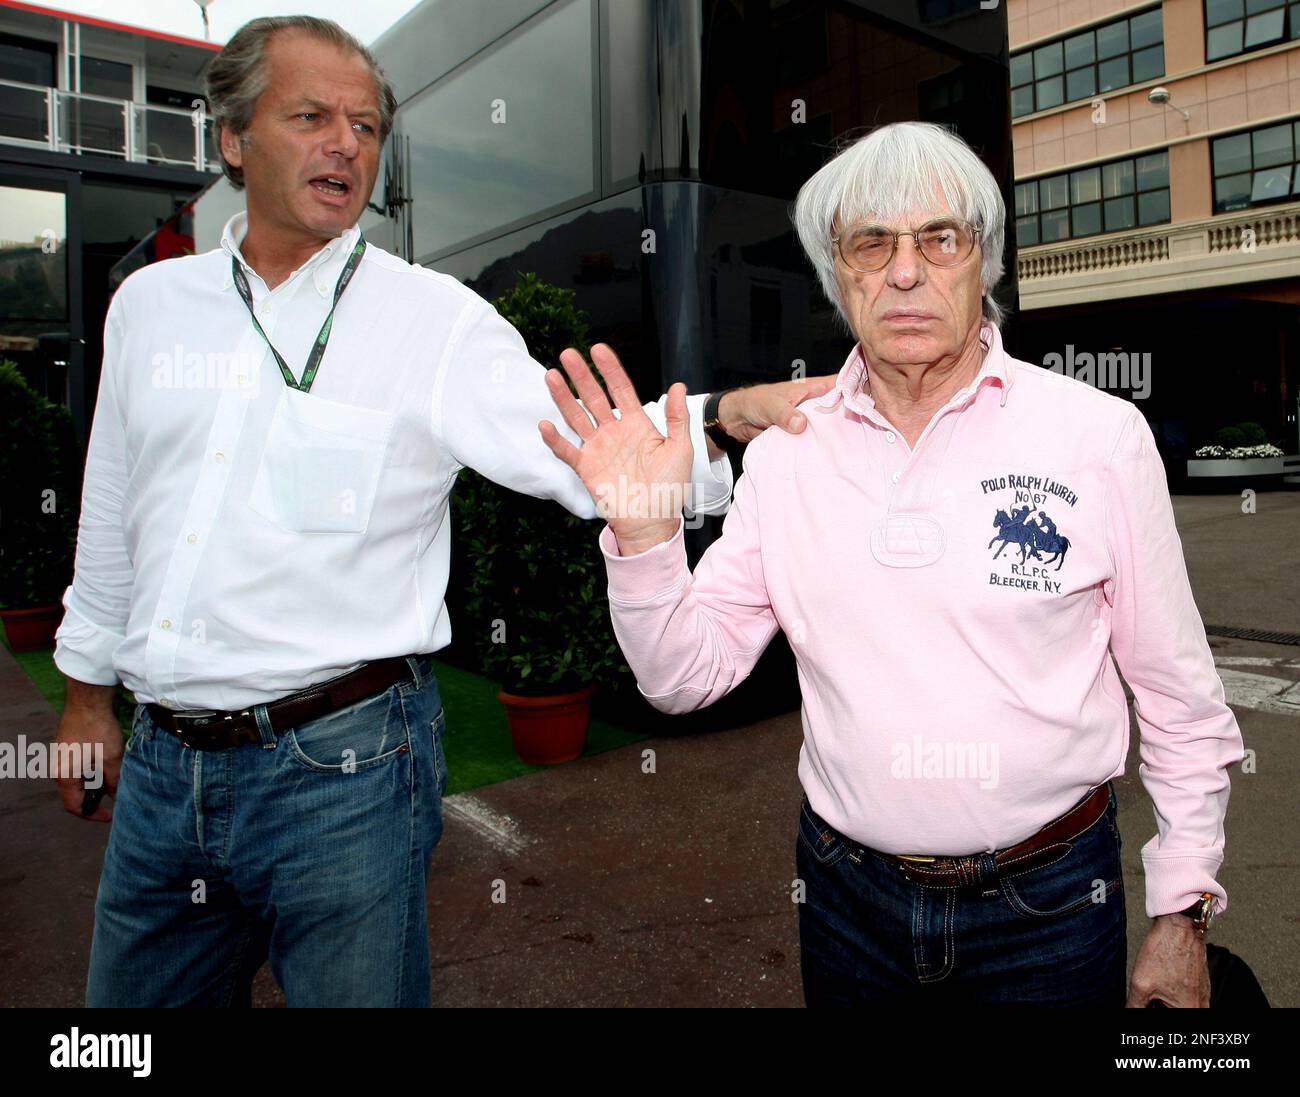 Bernie Ecclestone, president and CEO of the Formula One management , right, and his assistant Martin Reiss arrive to attend a FOTA (Formula One Teams Association) meeting at the Monaco racetrack, Friday, May 22, 2009. (AP Photo/Claude Paris) Stock Photo